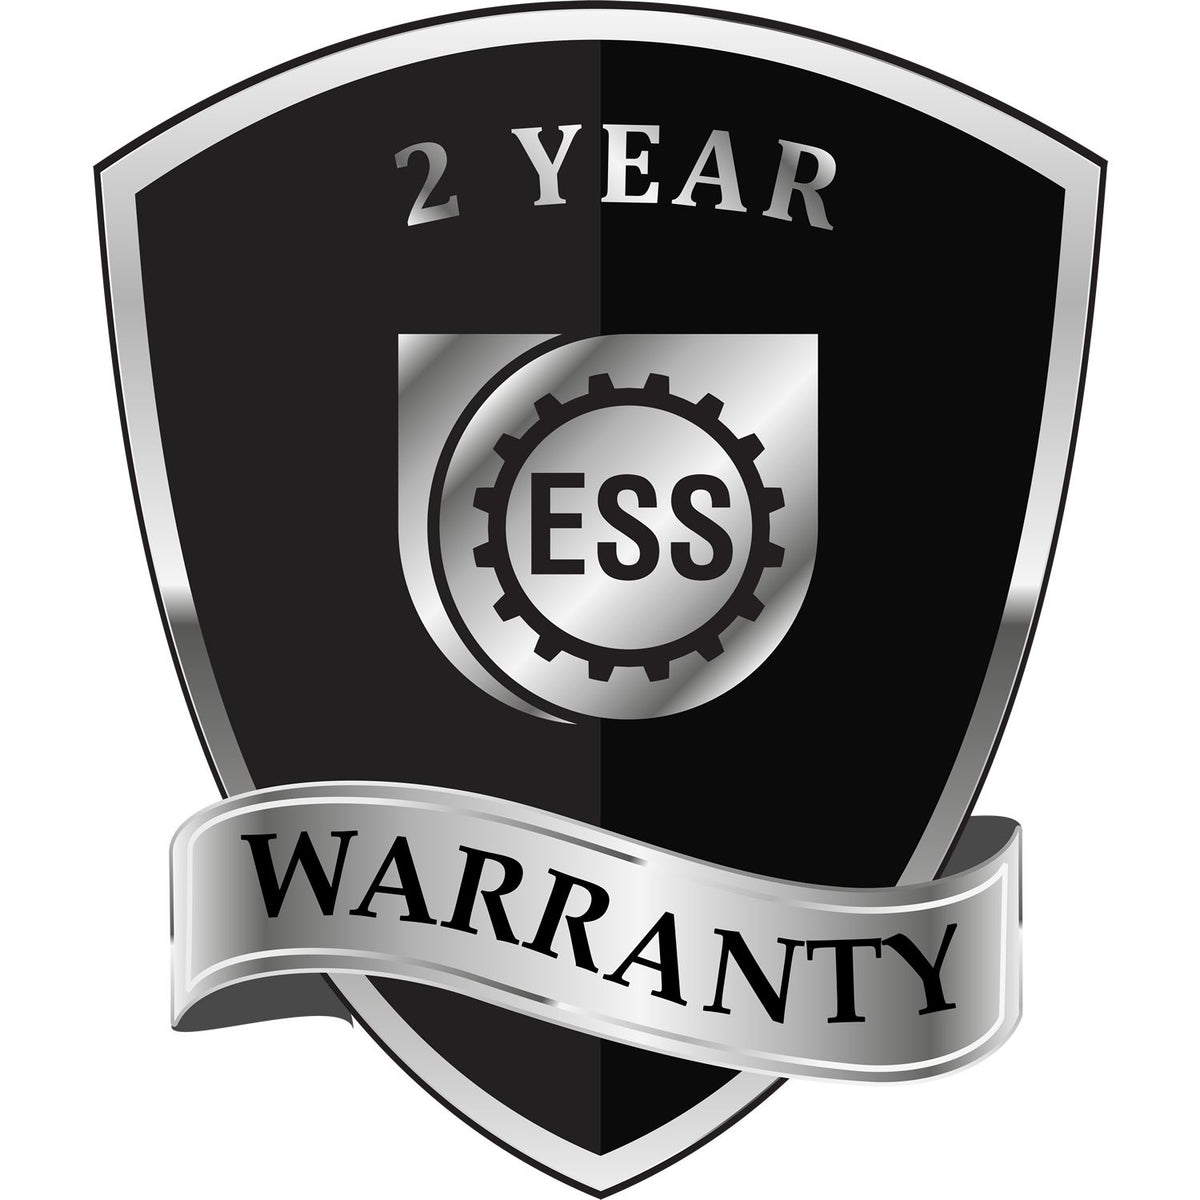 A badge or emblem showing a warranty icon for the Soft California Professional Engineer Seal